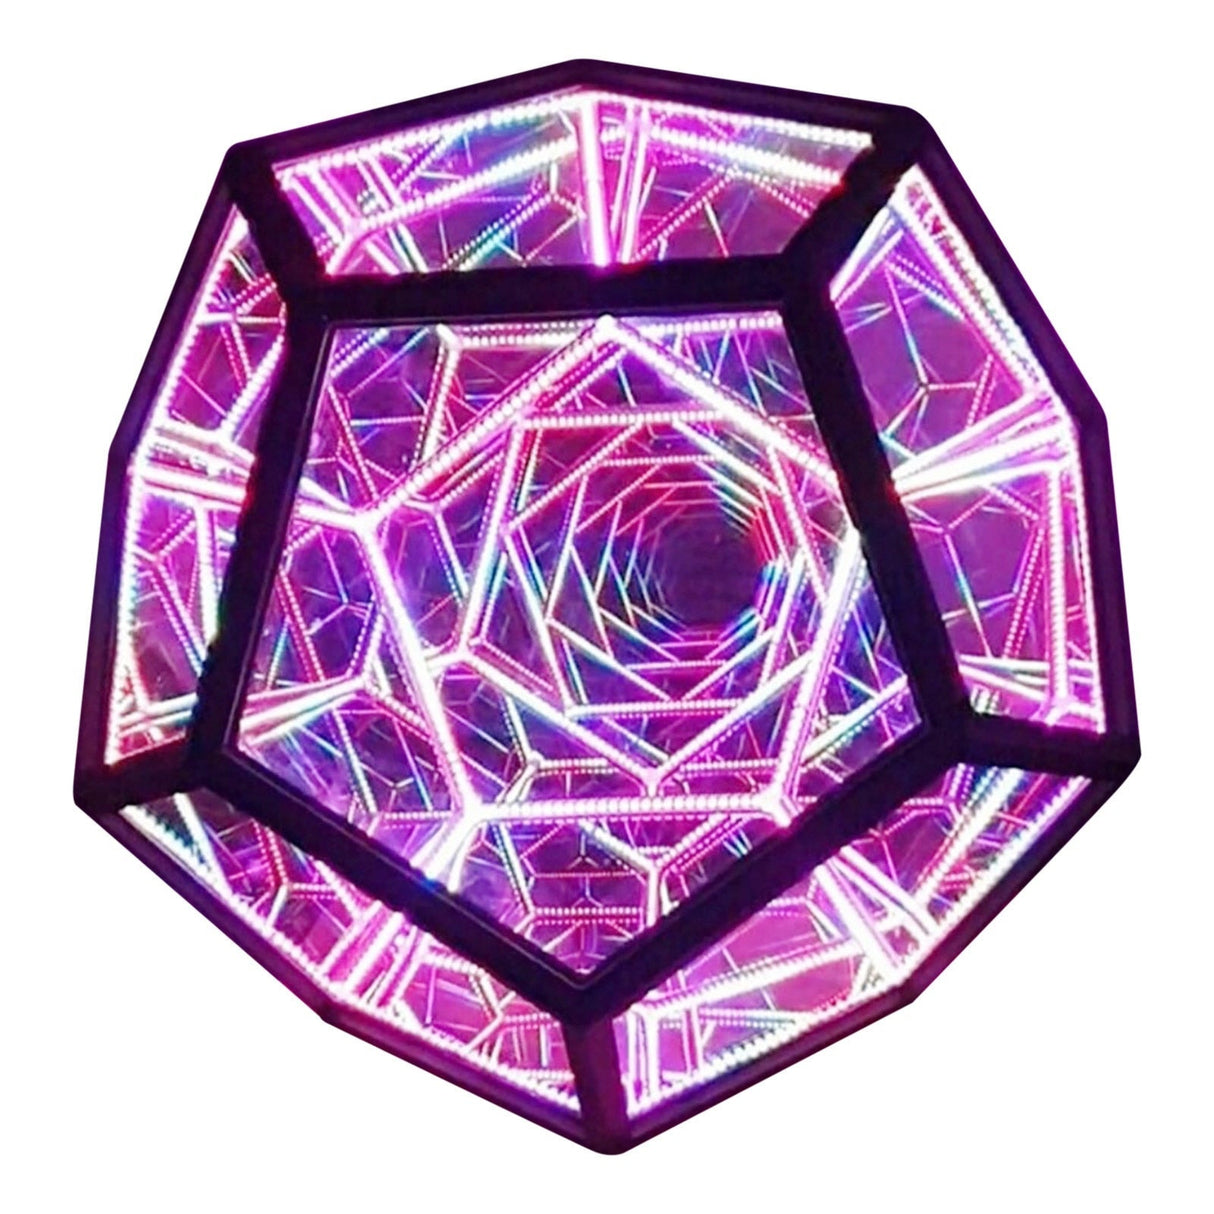 Aesthetic Dodecahedron Light